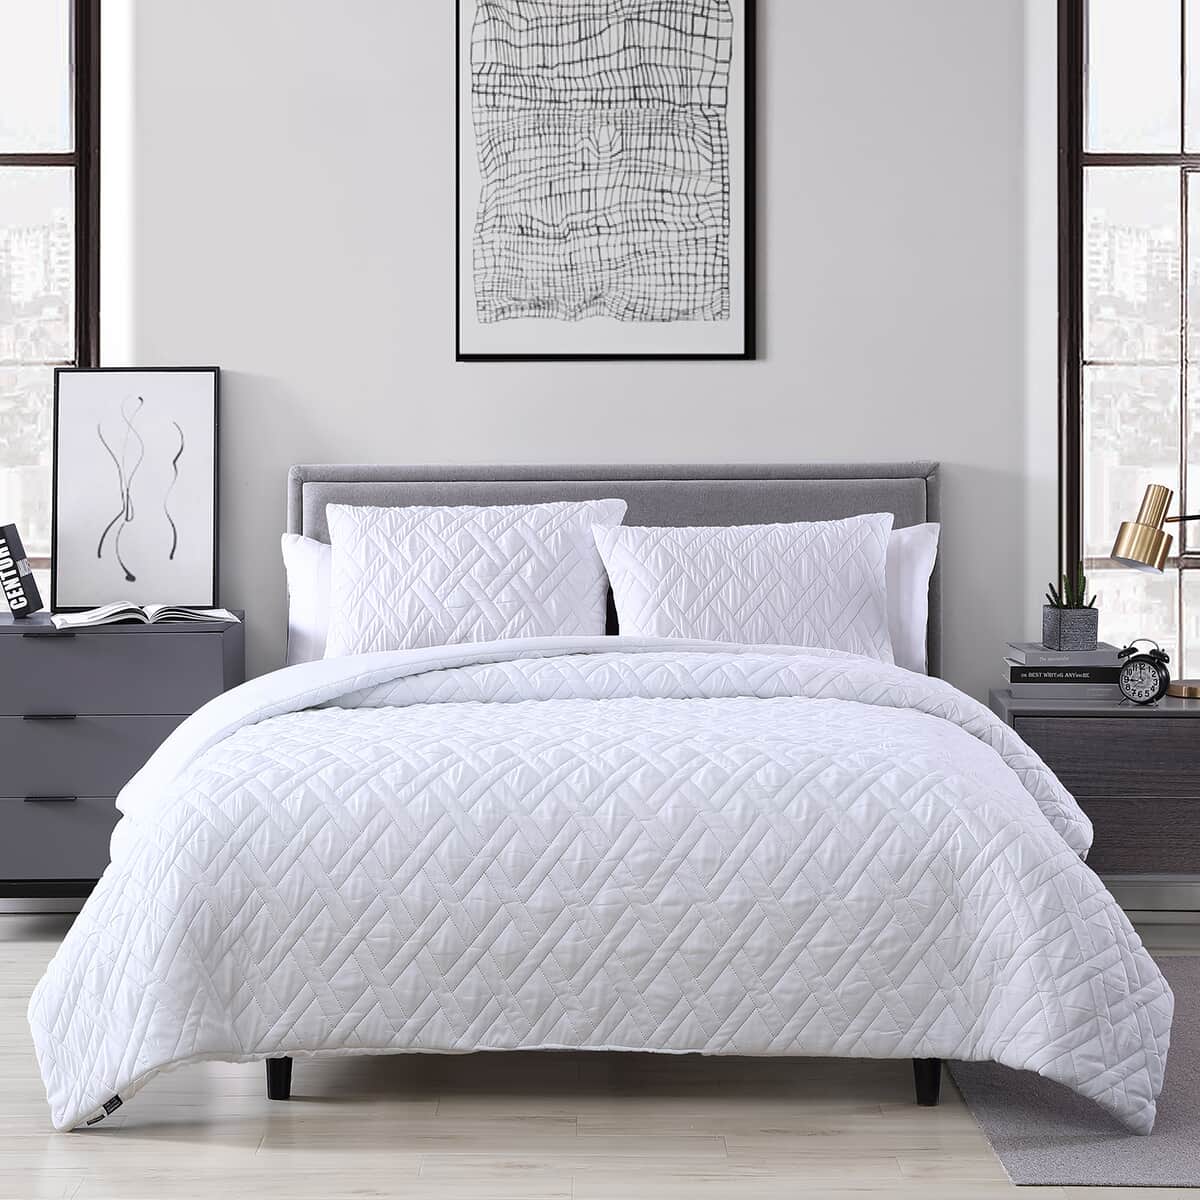 The Nesting Company- Larch 3 Piece Queen Comforter Set White image number 1